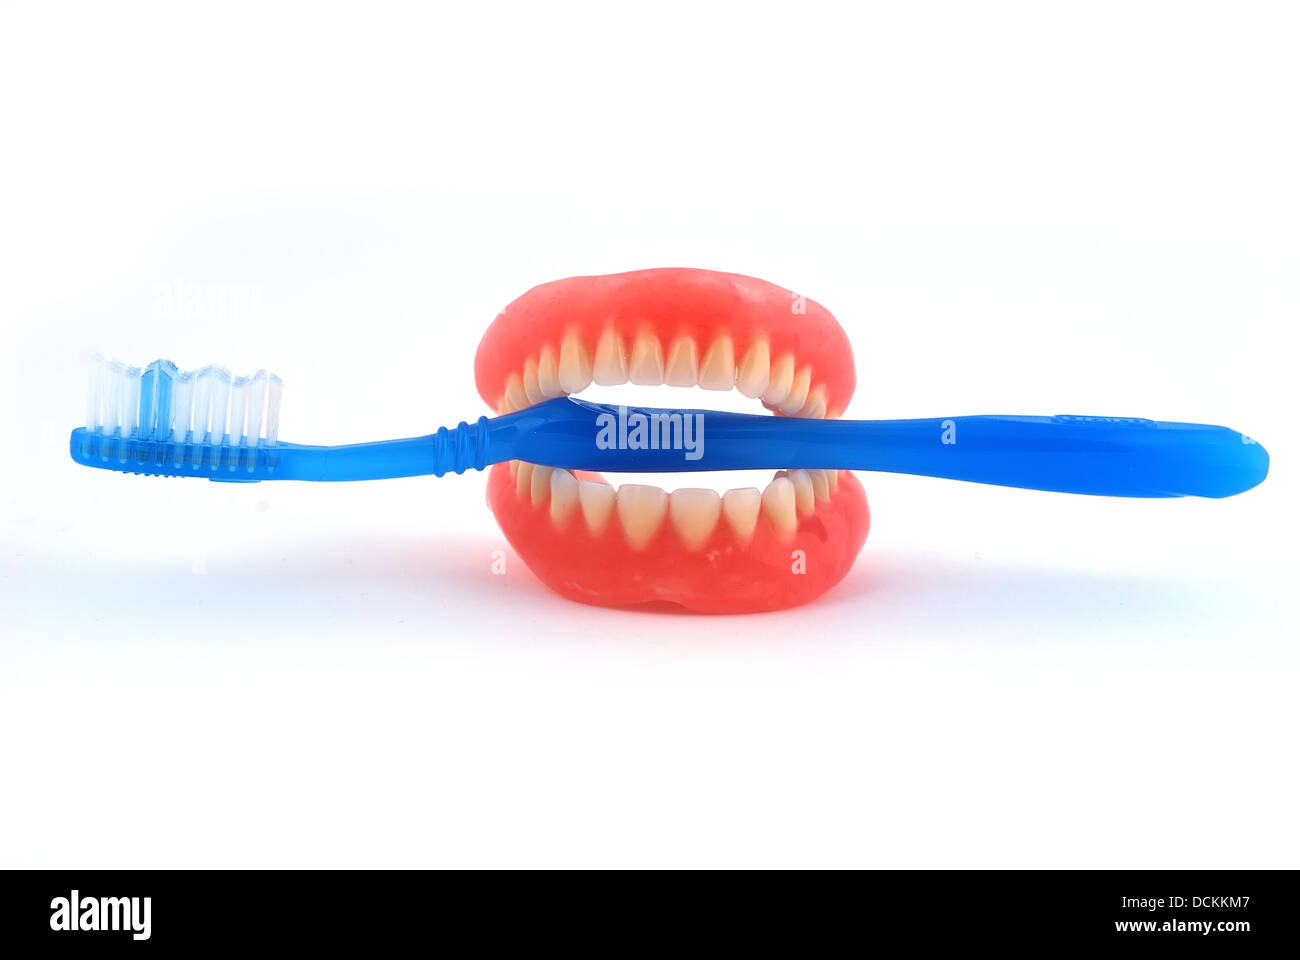 dentures and toothbrush Stock Photo - Alamy